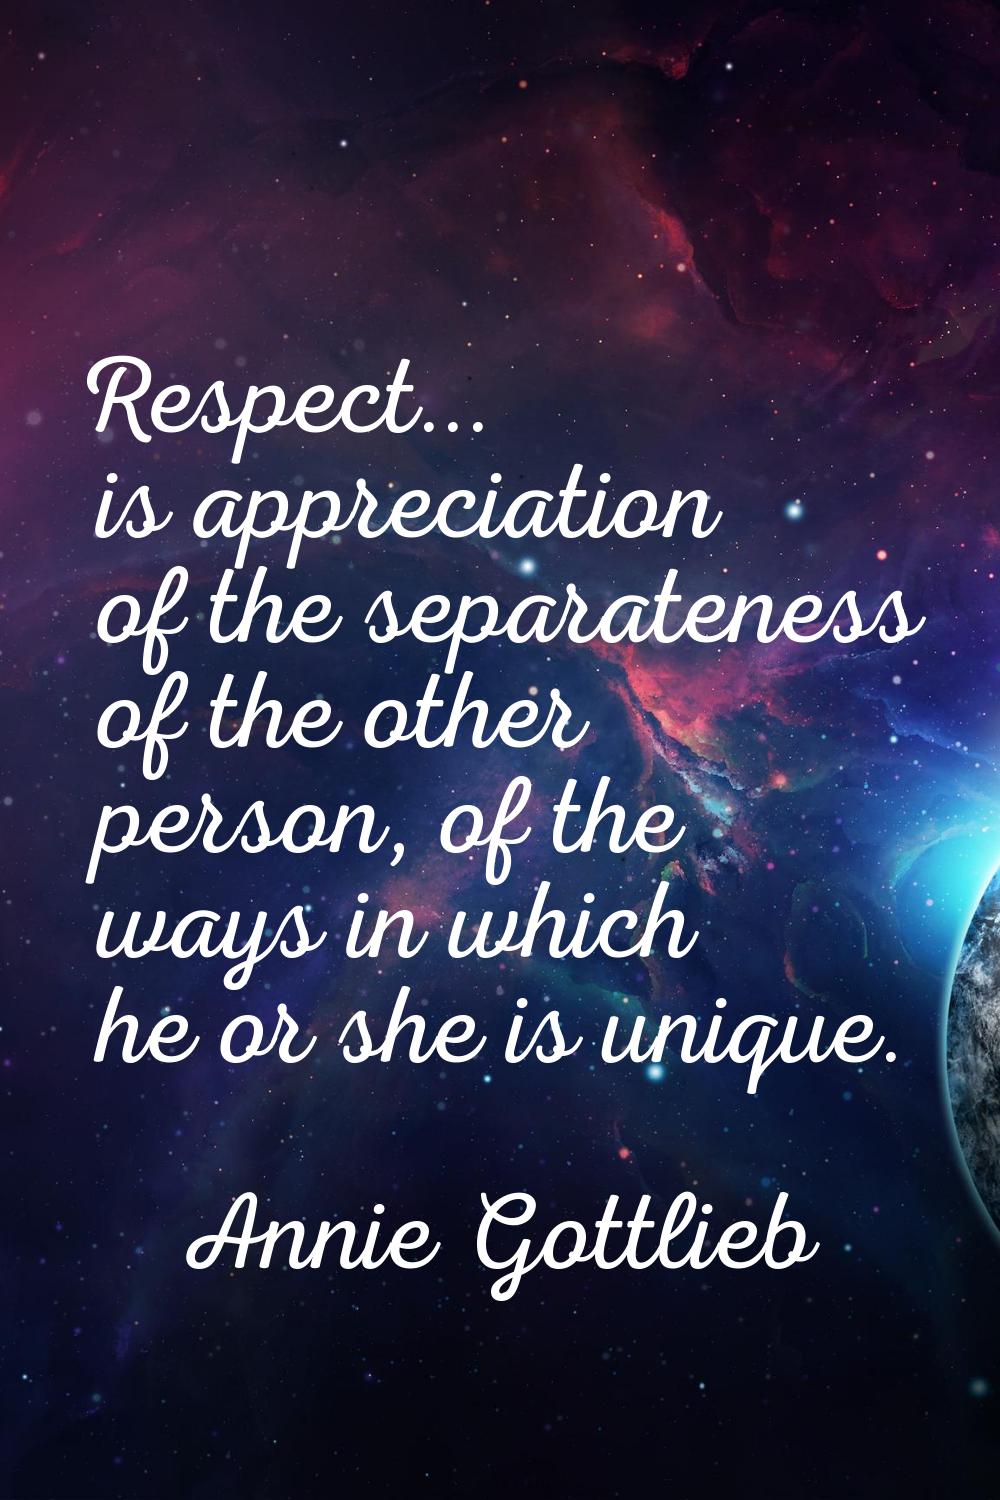 Respect... is appreciation of the separateness of the other person, of the ways in which he or she 